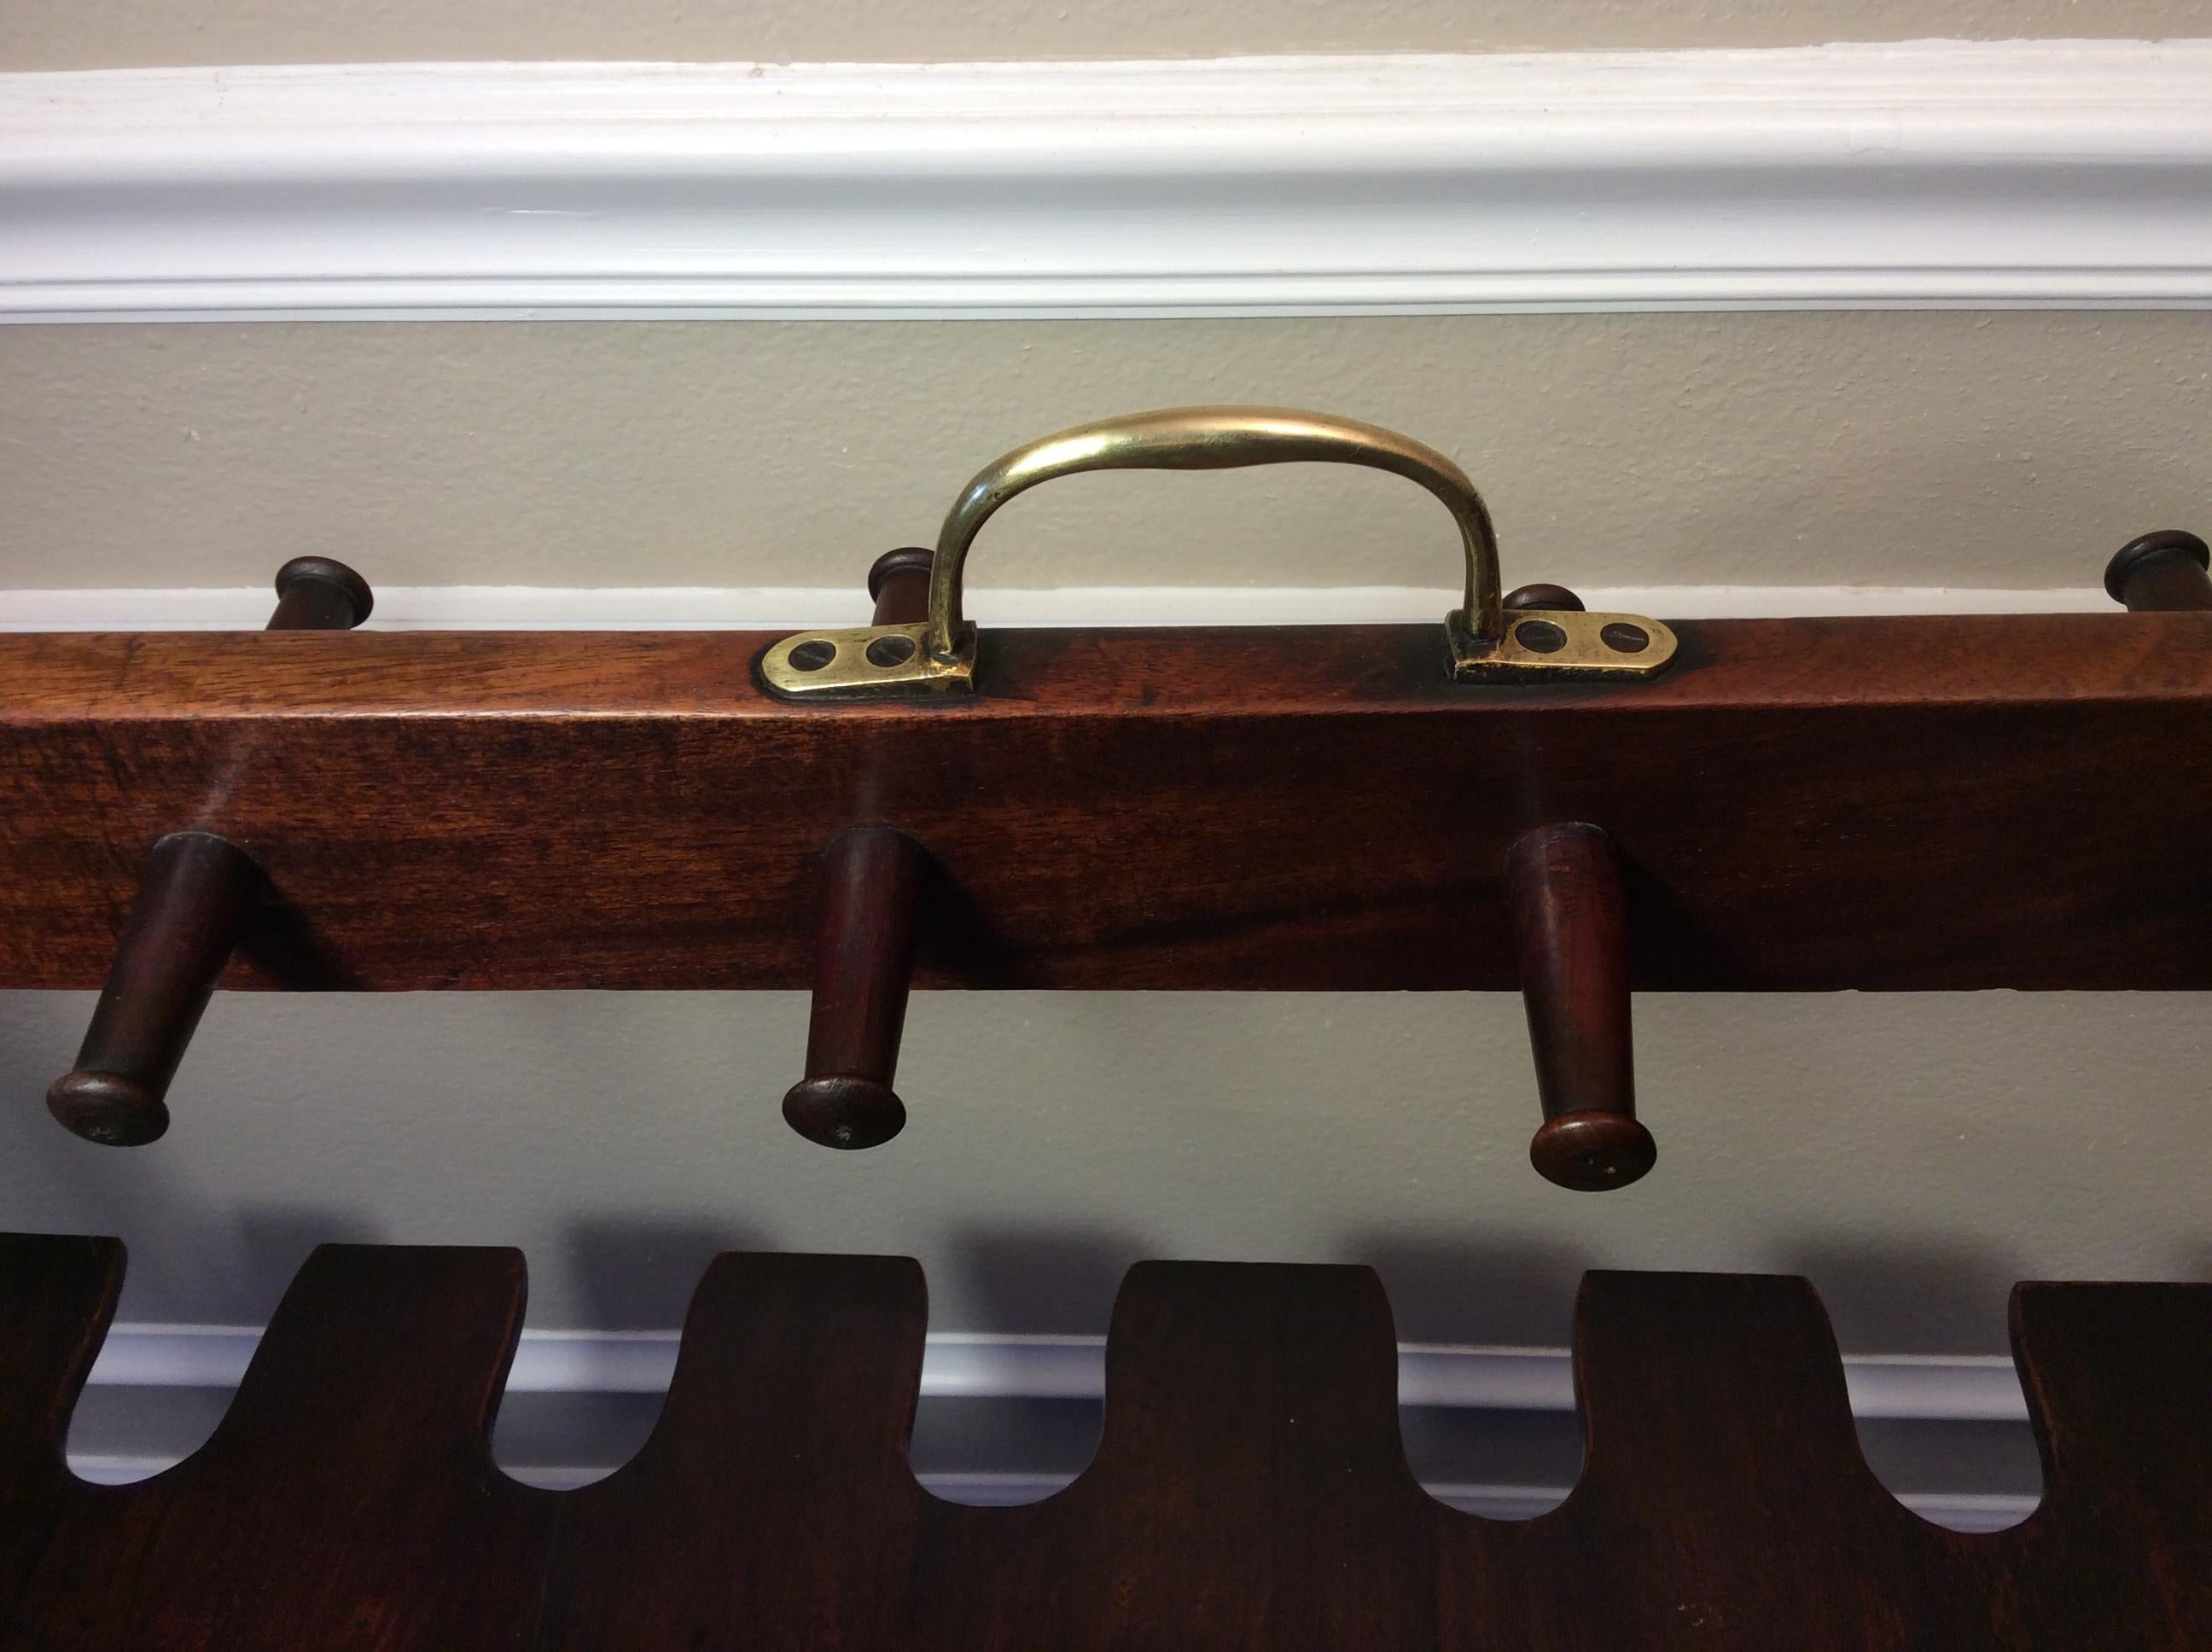 Georgian Boot Rack in excellent condition 1830-40. Retaining its original finish that appears to have only been waxed down through the years. The Mahogany has a very warm color and patina to it and it the Brass handle is original. There are a couple